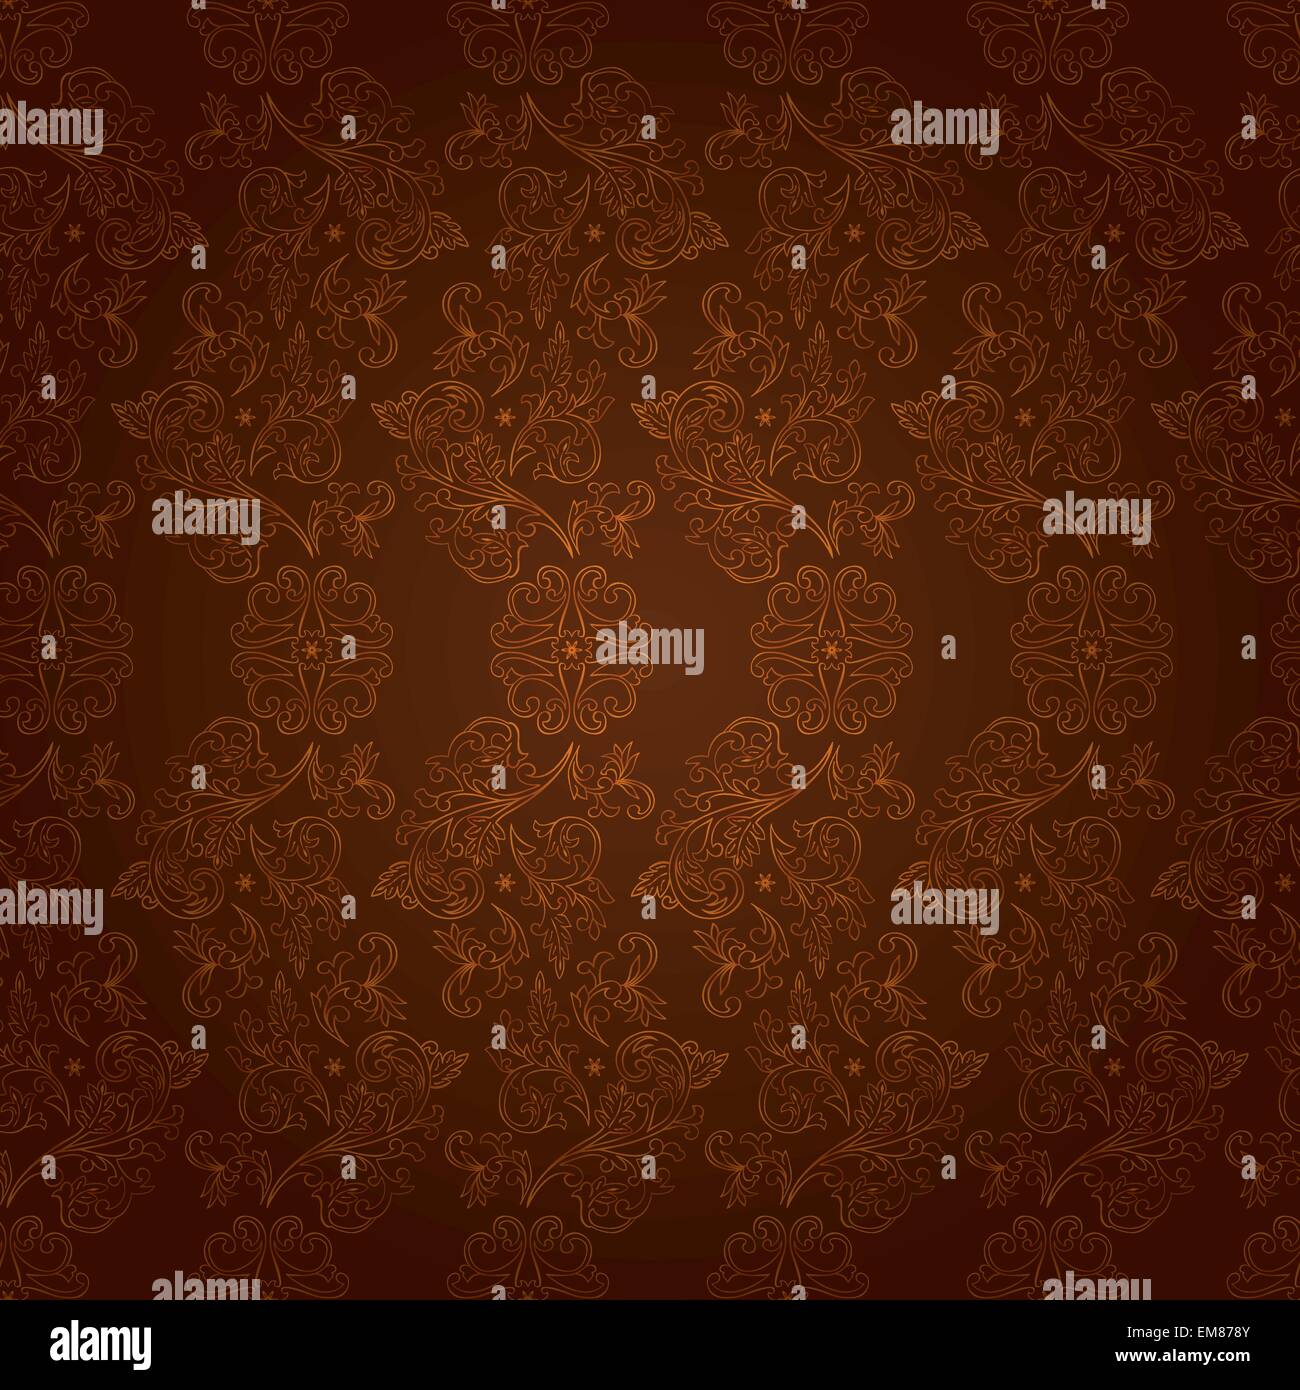 Vintage floral seamless pattern on brown Stock Vector